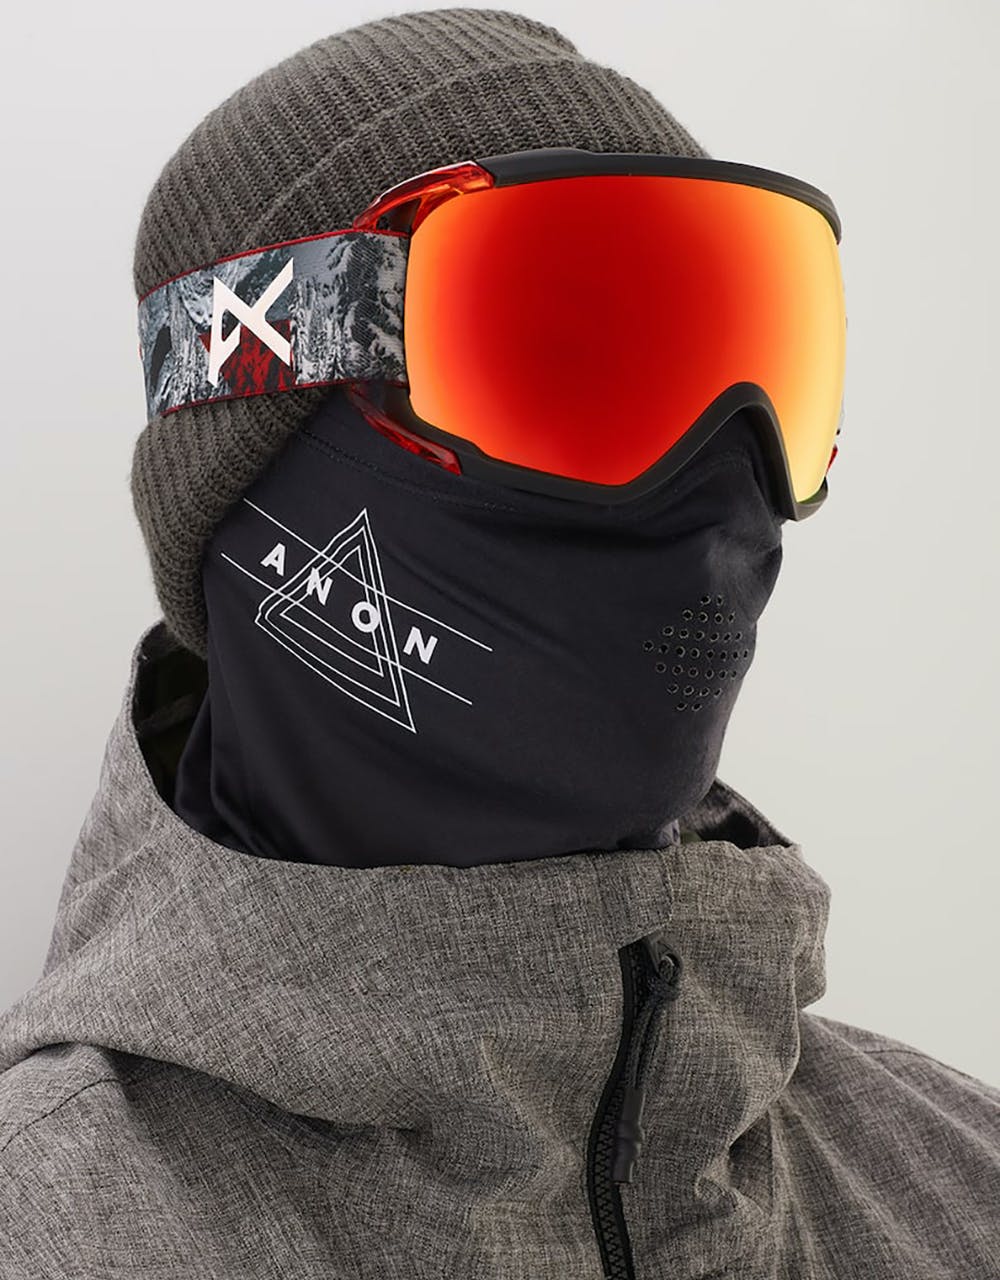 Anon Circuit MFI Snowboard Goggles - Red Planet/Sonar Red